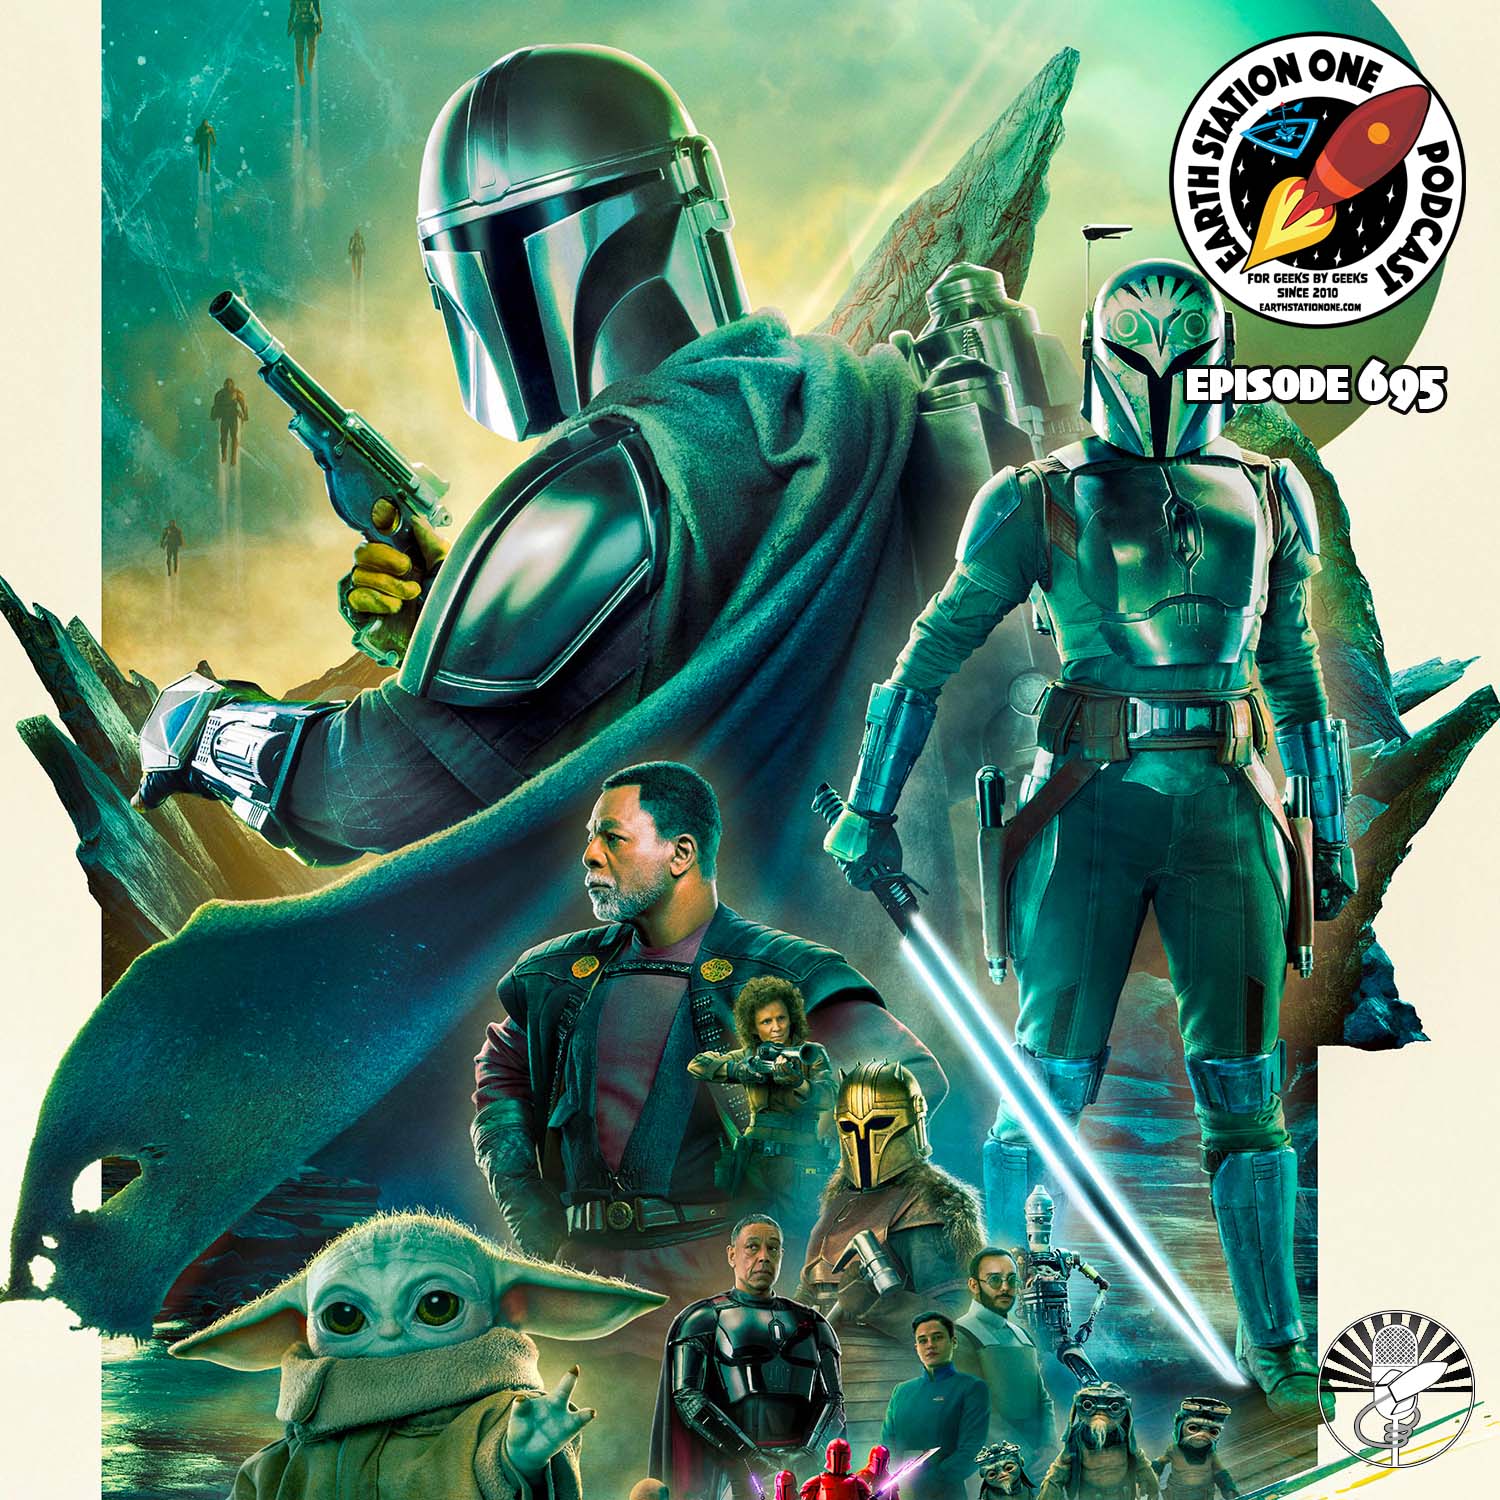 The Earth Station One Podcast Ep 695 - Mandalorian Season 3 Review